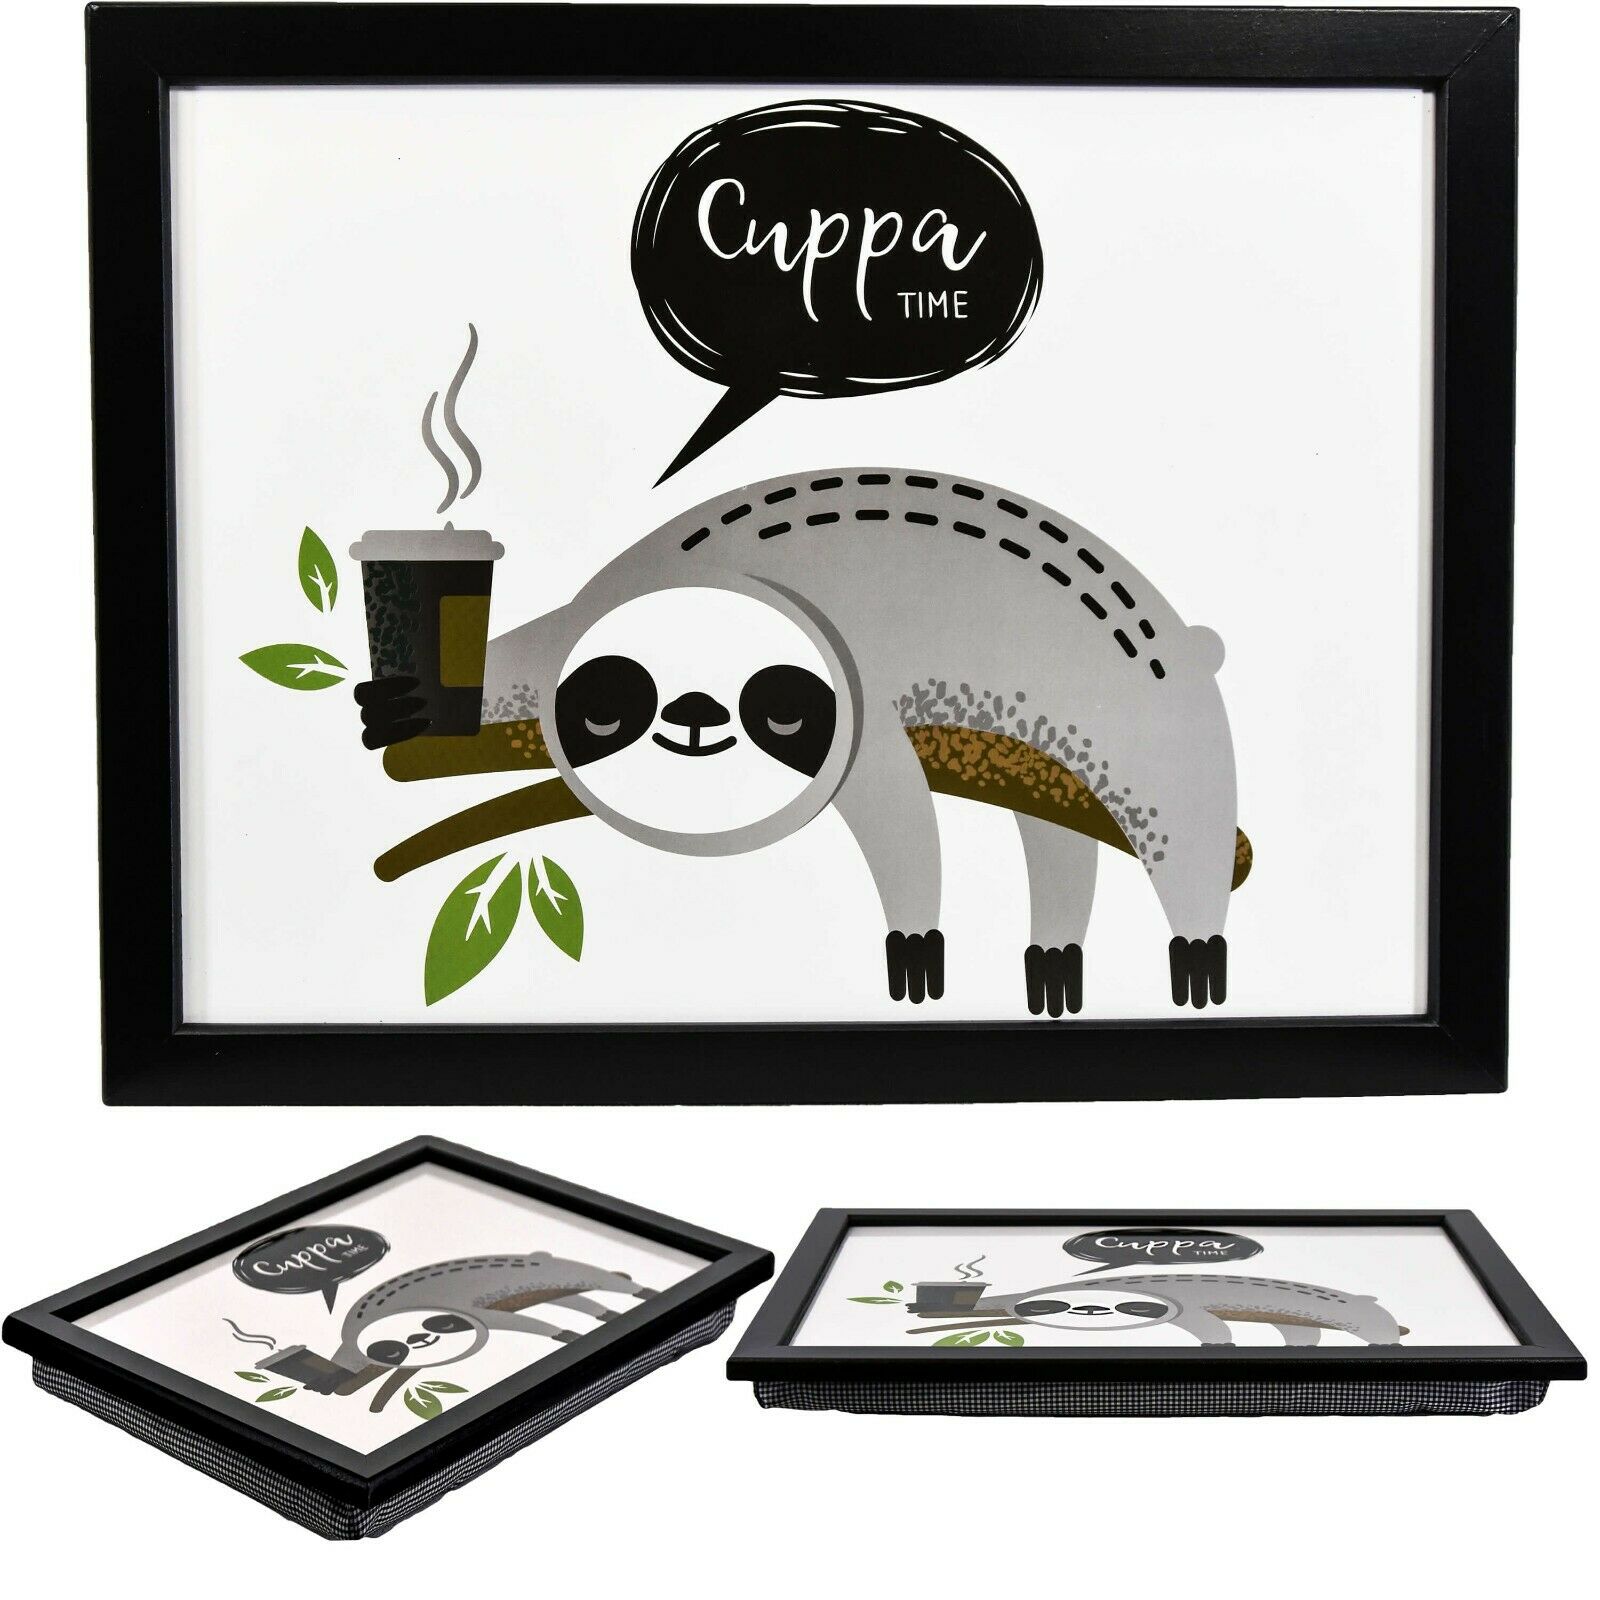 Sloth Lap Tray With Bean Bag Cushion The Magic Toy Shop - The Magic Toy Shop